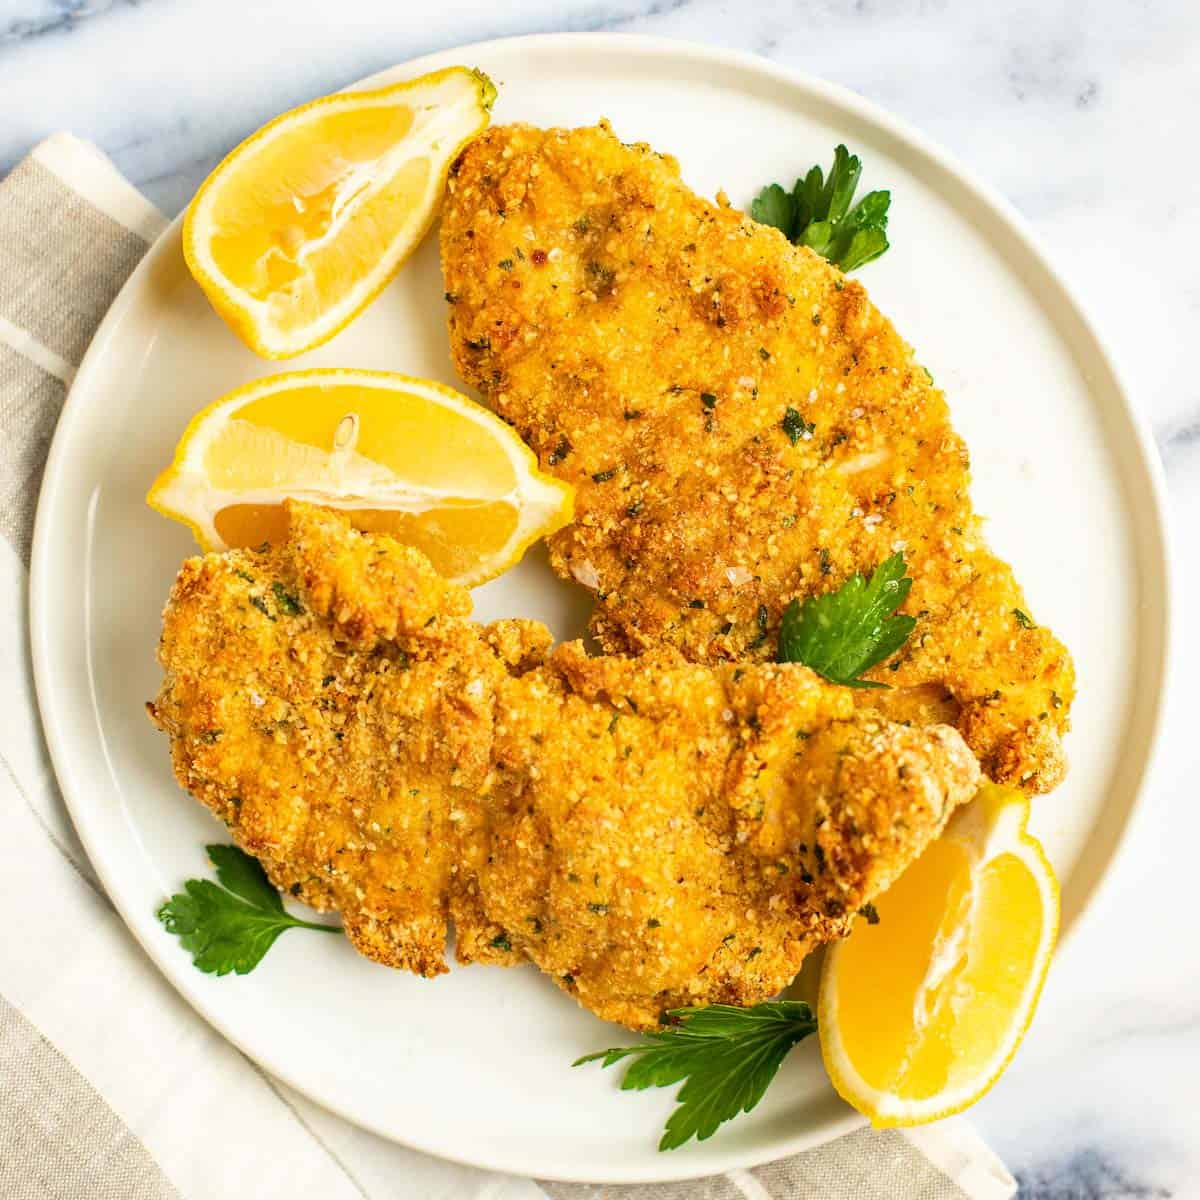 Crispy chicken schnitzel for Passover on a plate with lemon and parsley.